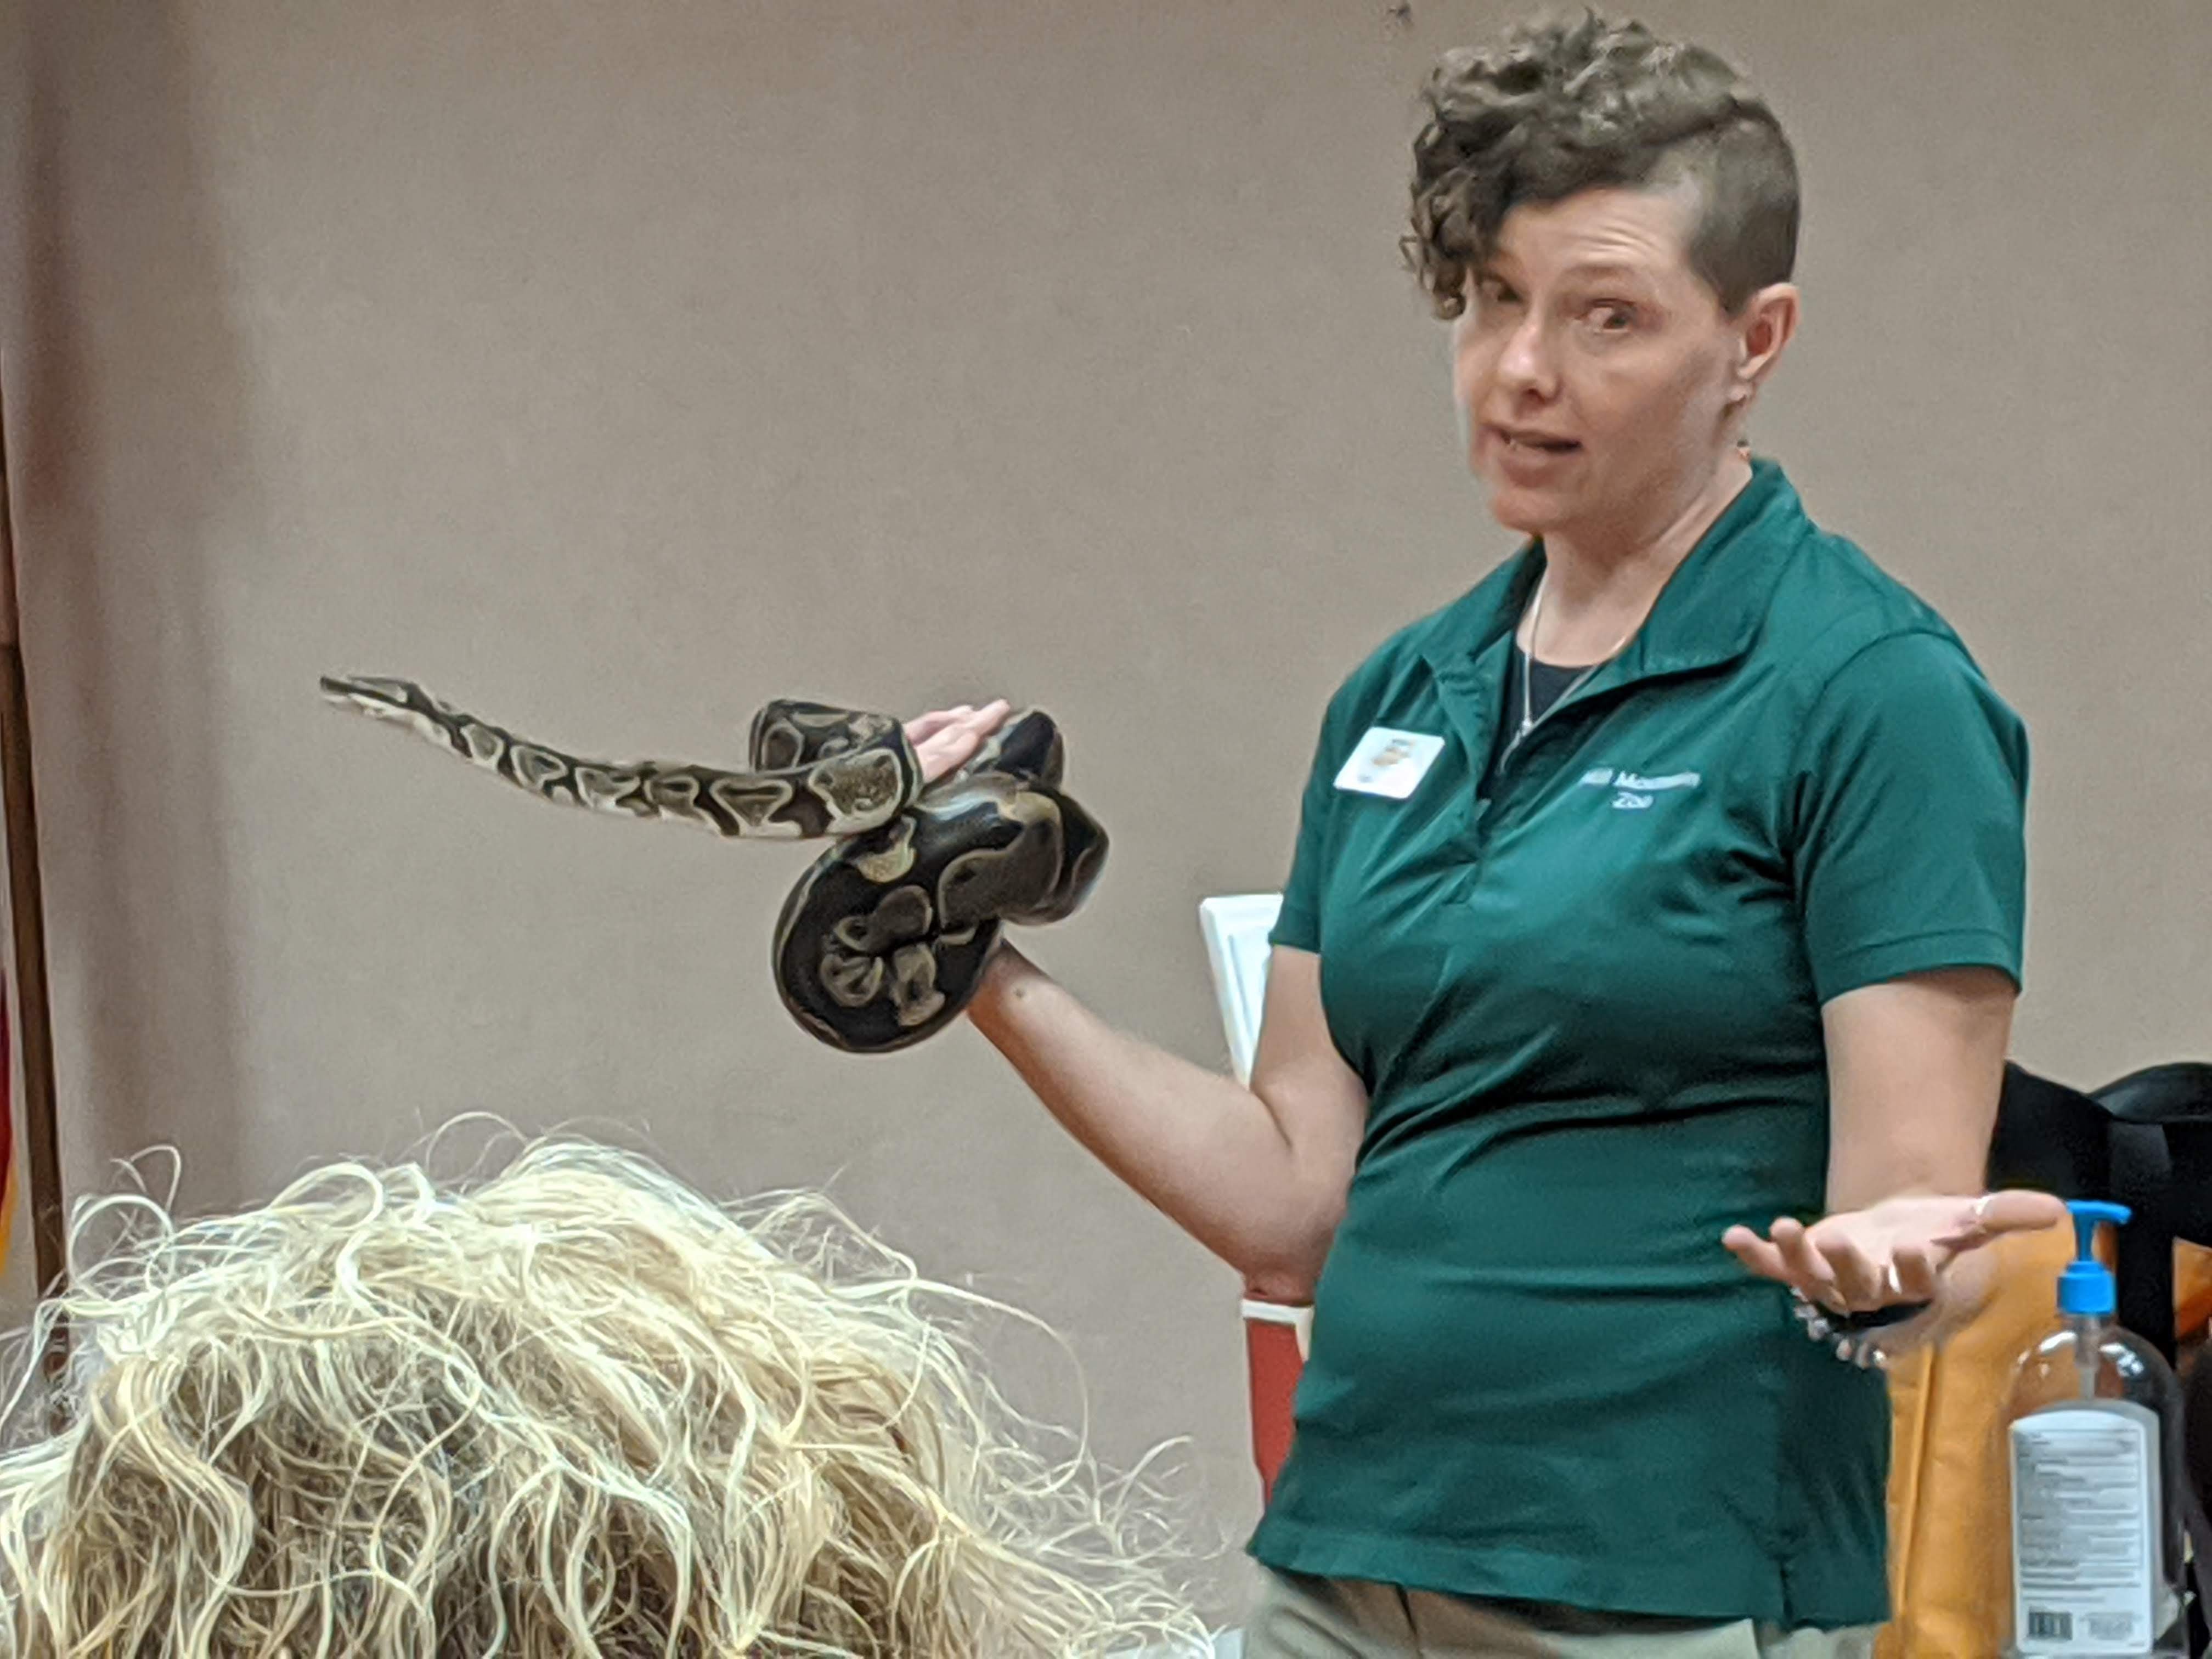 Volunteer from Mill Mountain Zoo holding a snake at the Bedford Library.